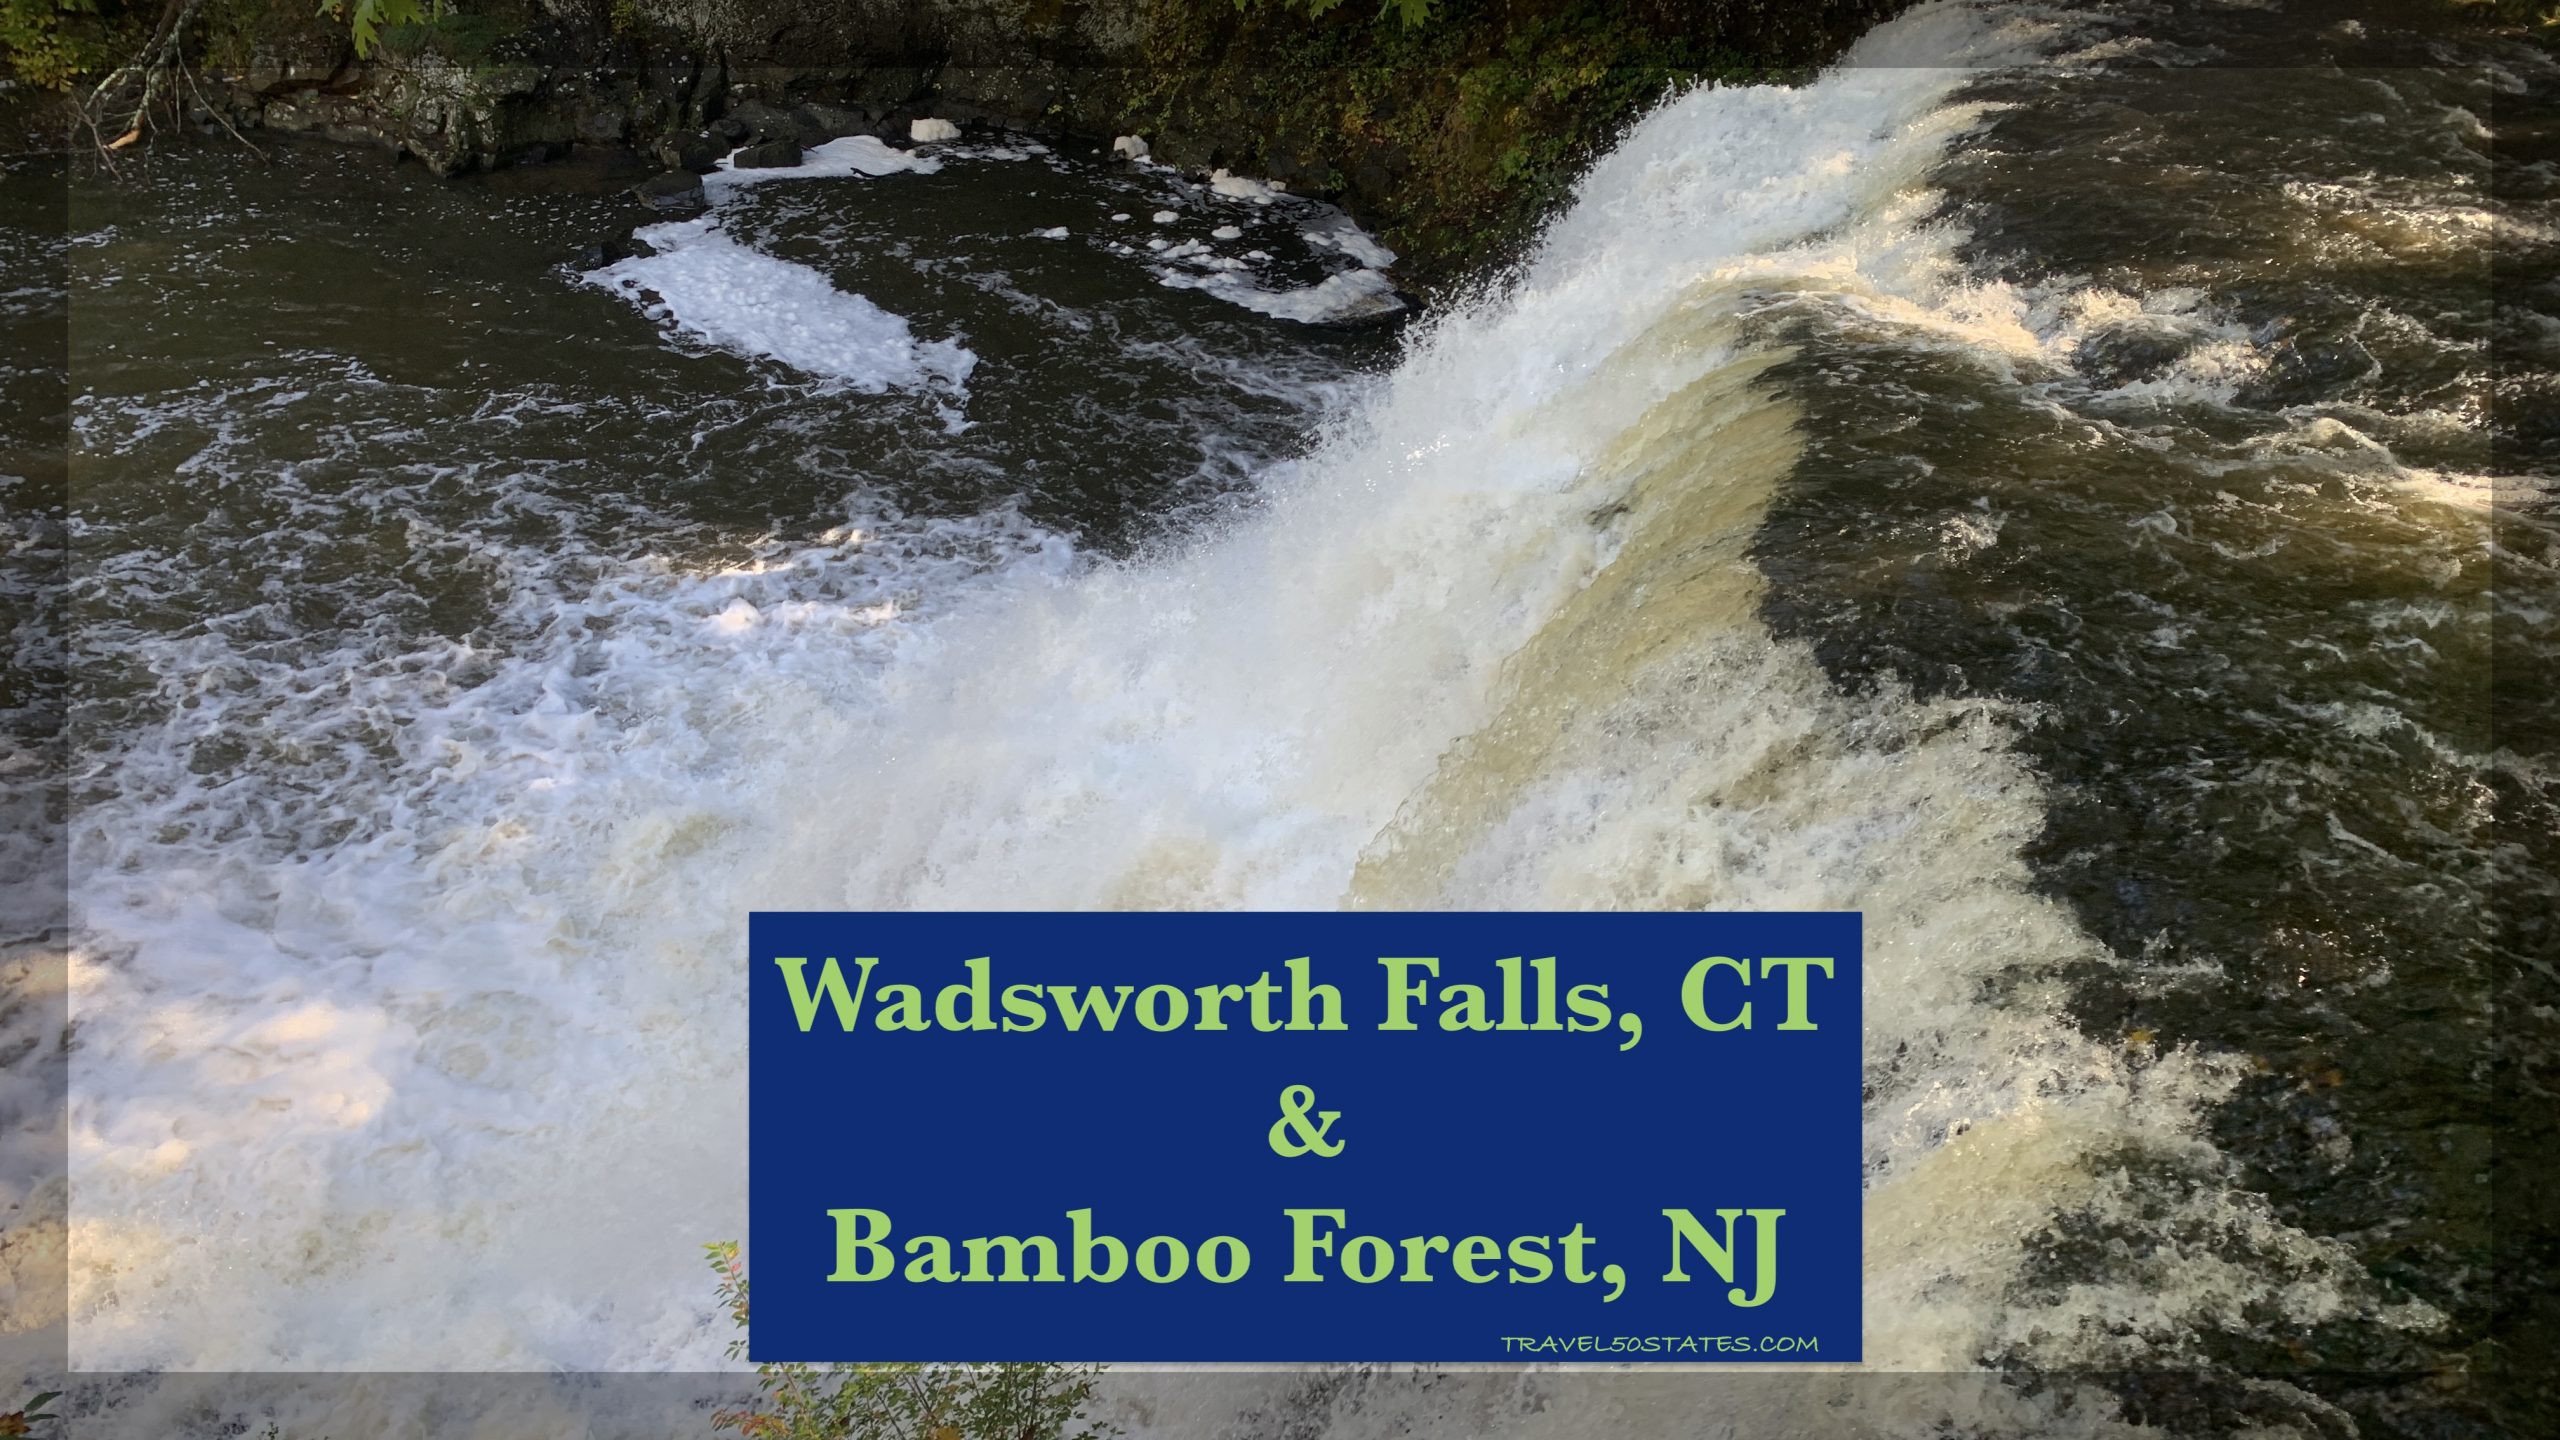 Bamboo Grove, New Jersey and Wadsworth Falls, Connecticut